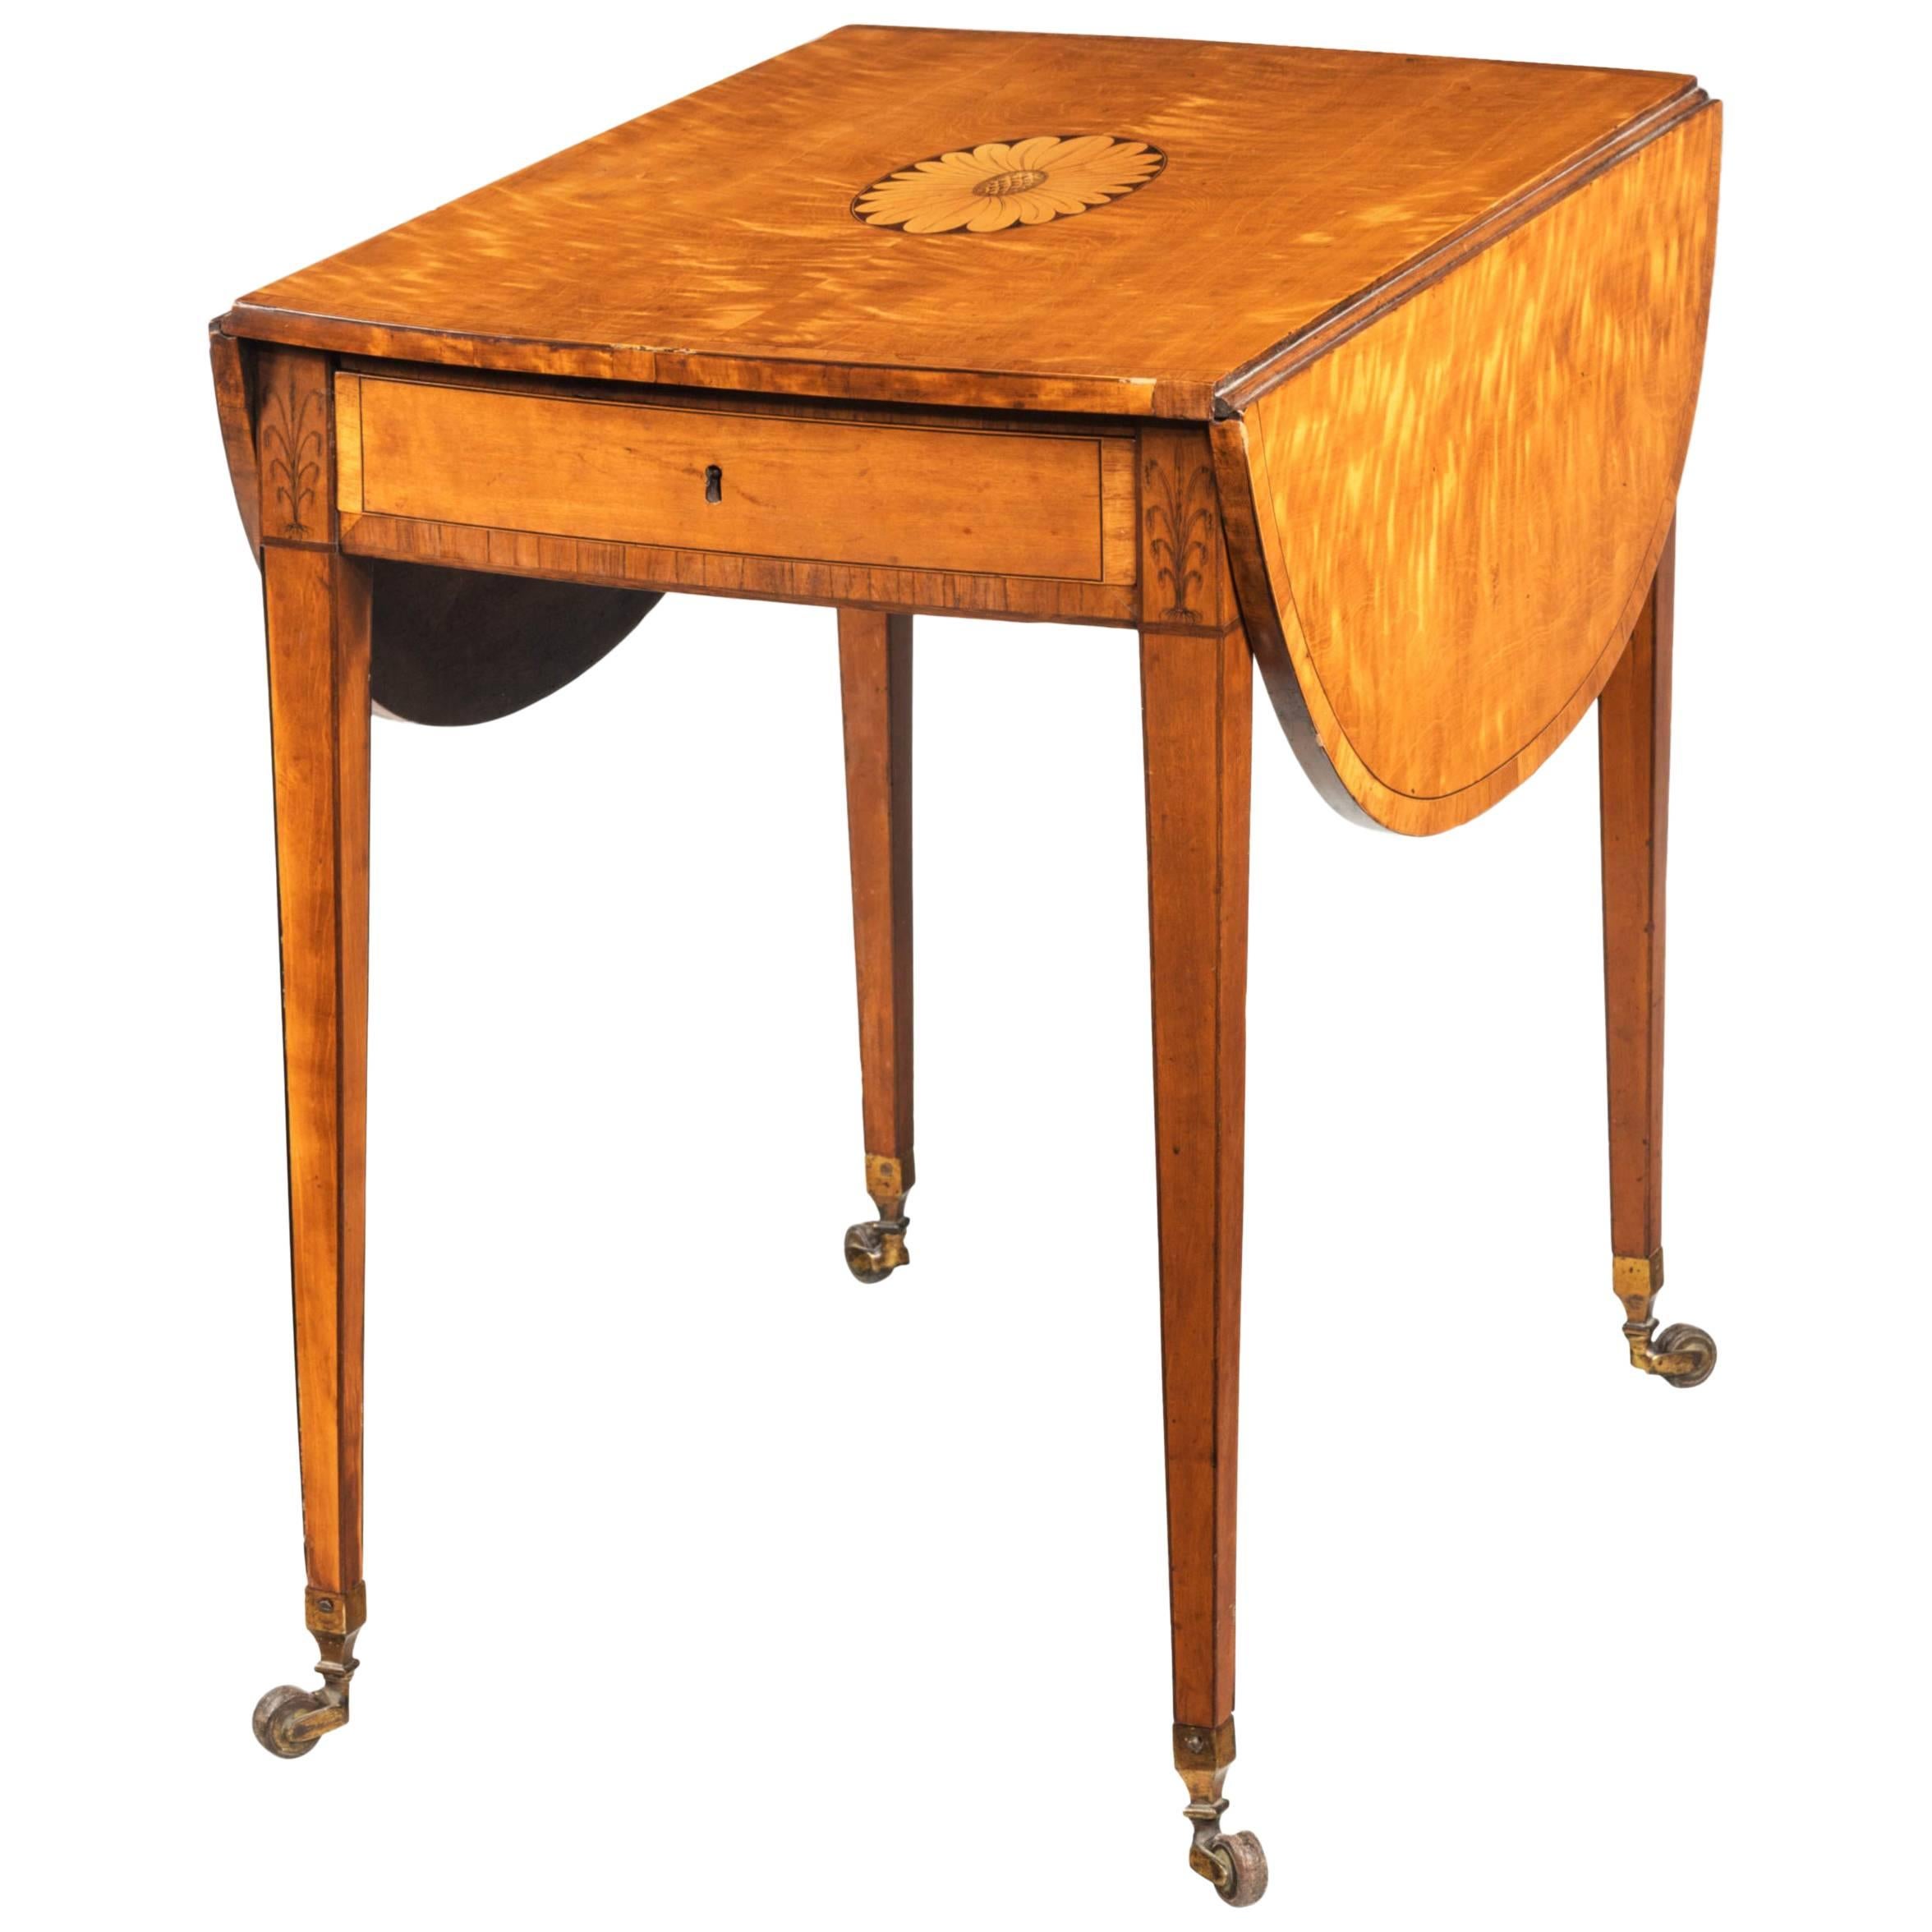 Late 18th Century Satinwood Pembroke Table